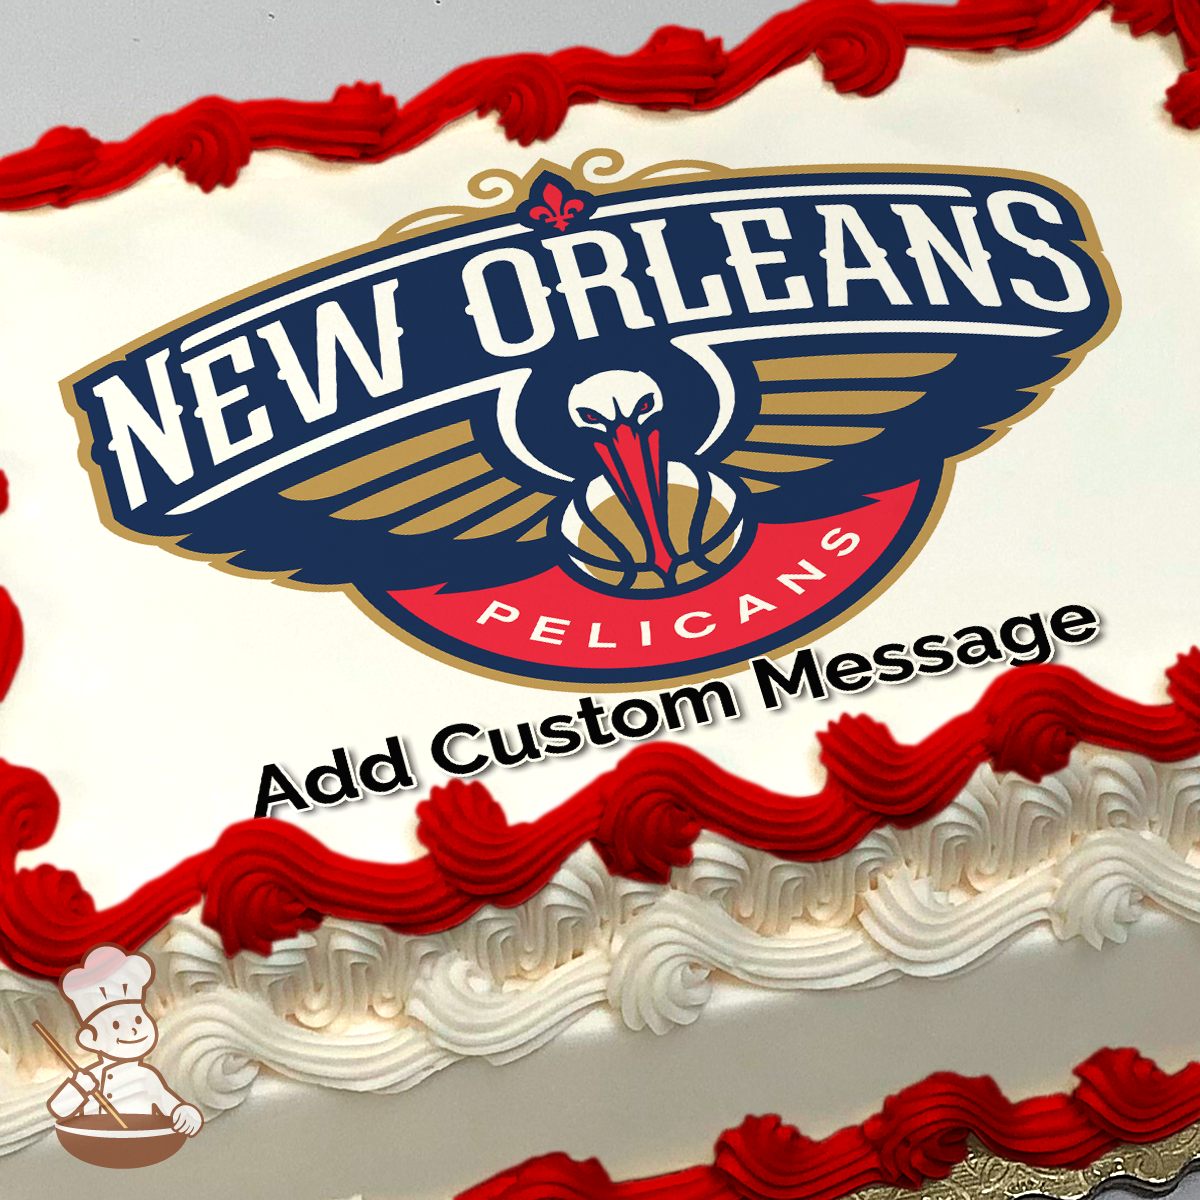 NBA New Orleans Pelicans Photo Cake